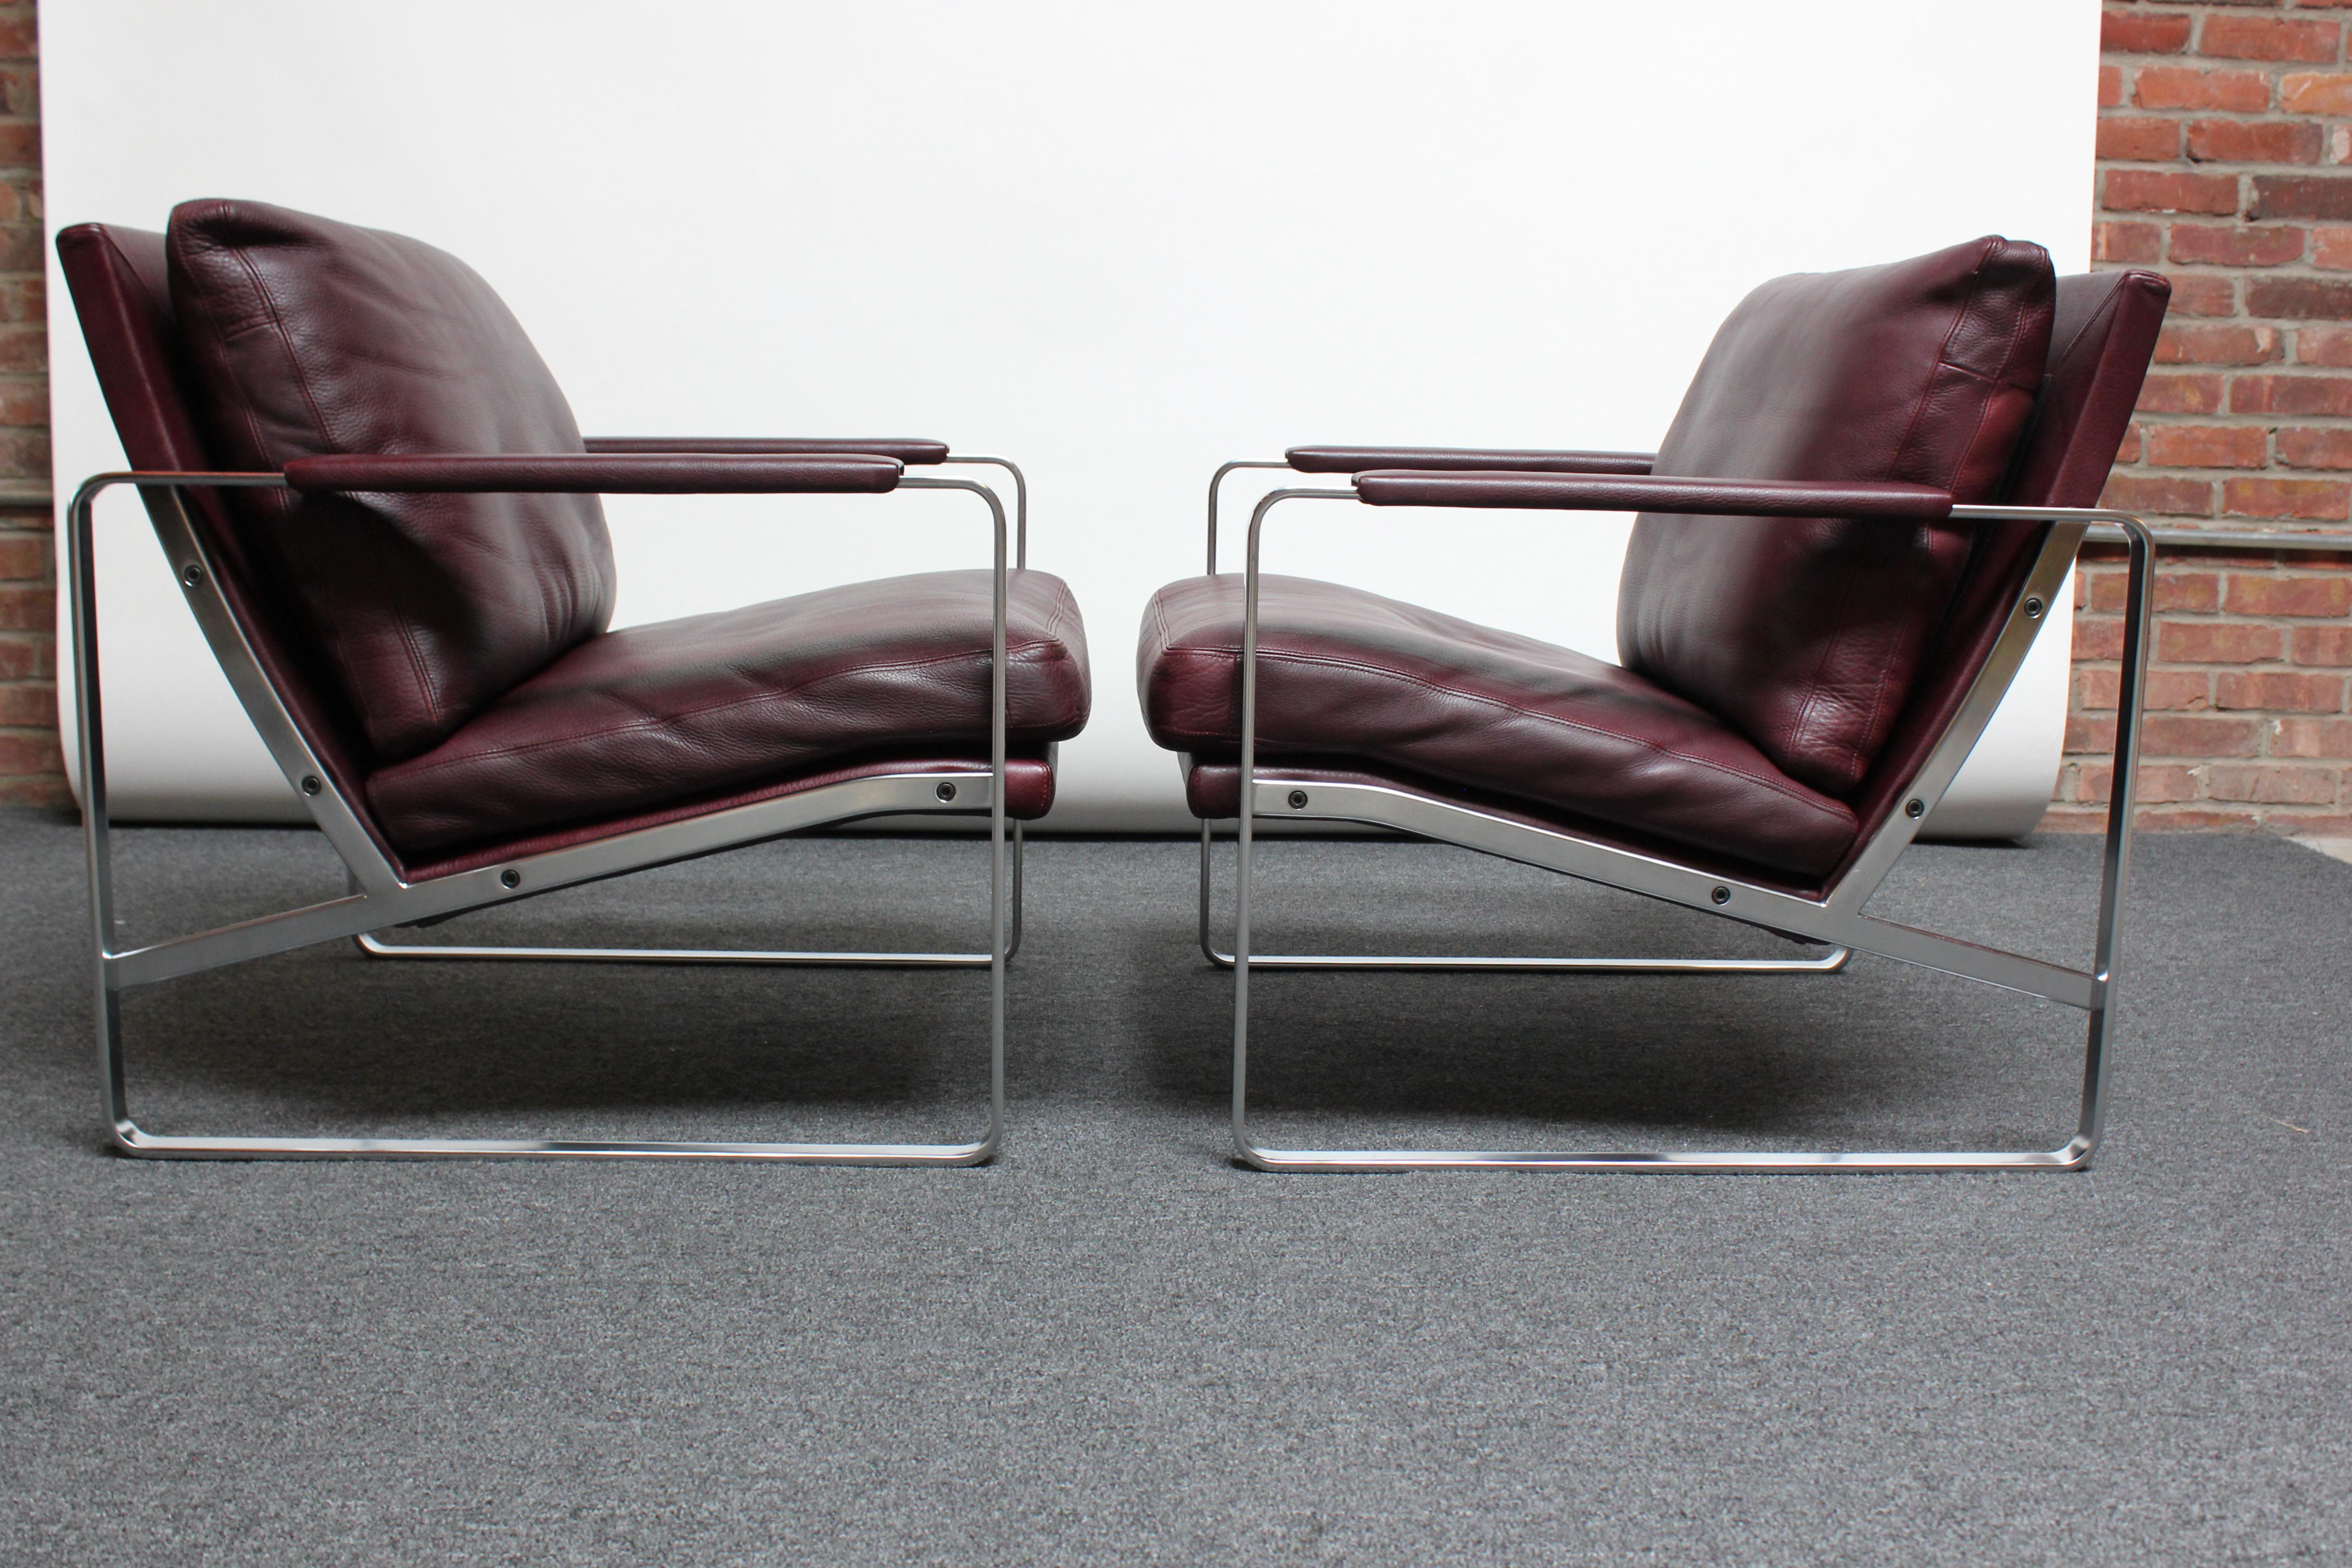 Pair of lounge chairs designed as part of the 